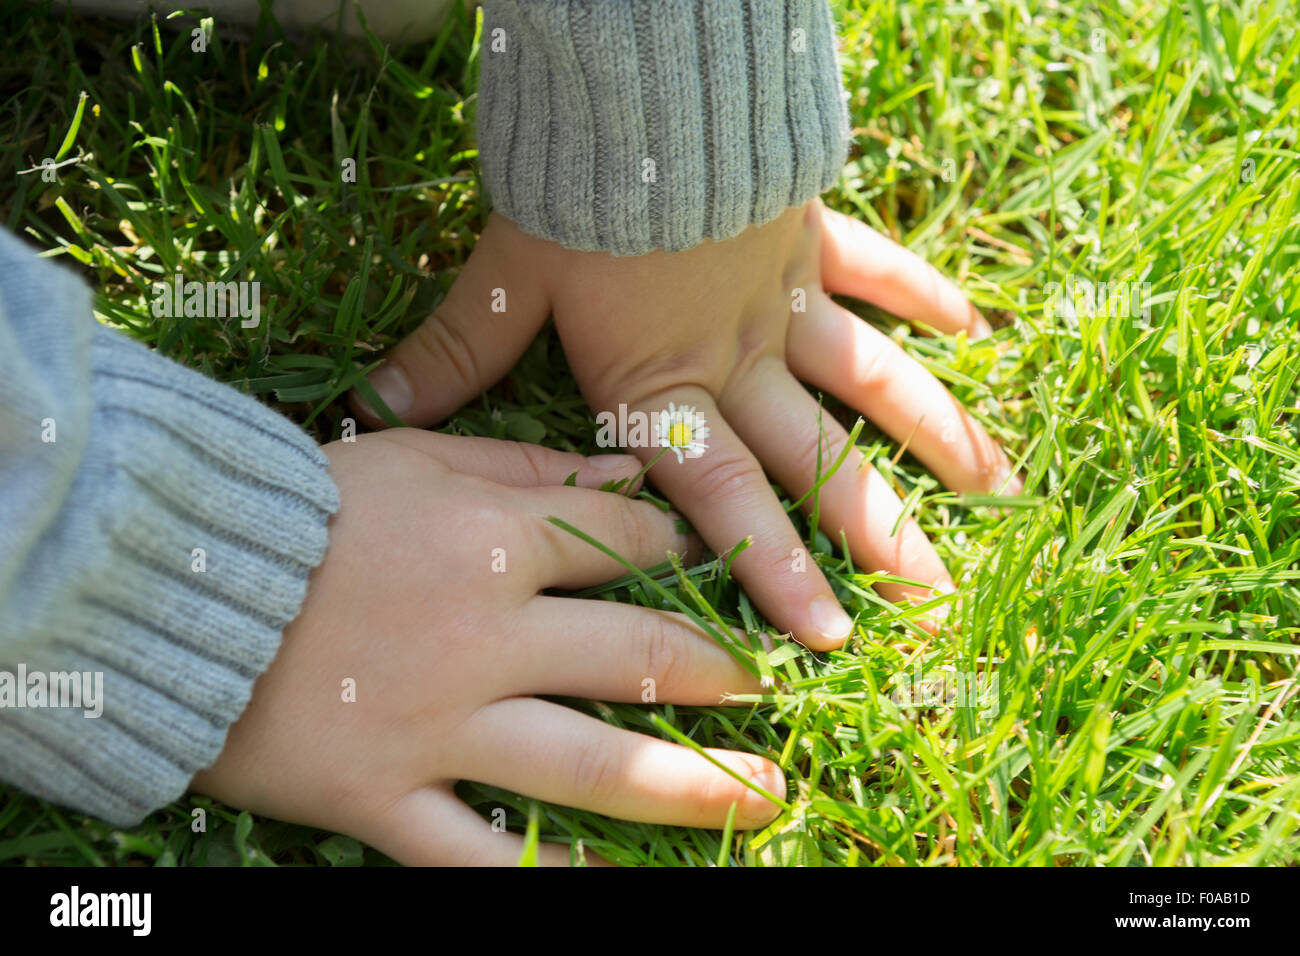 Hand Touching Grass At Summer Stock Photo, Picture and Royalty Free Image.  Image 82237401.